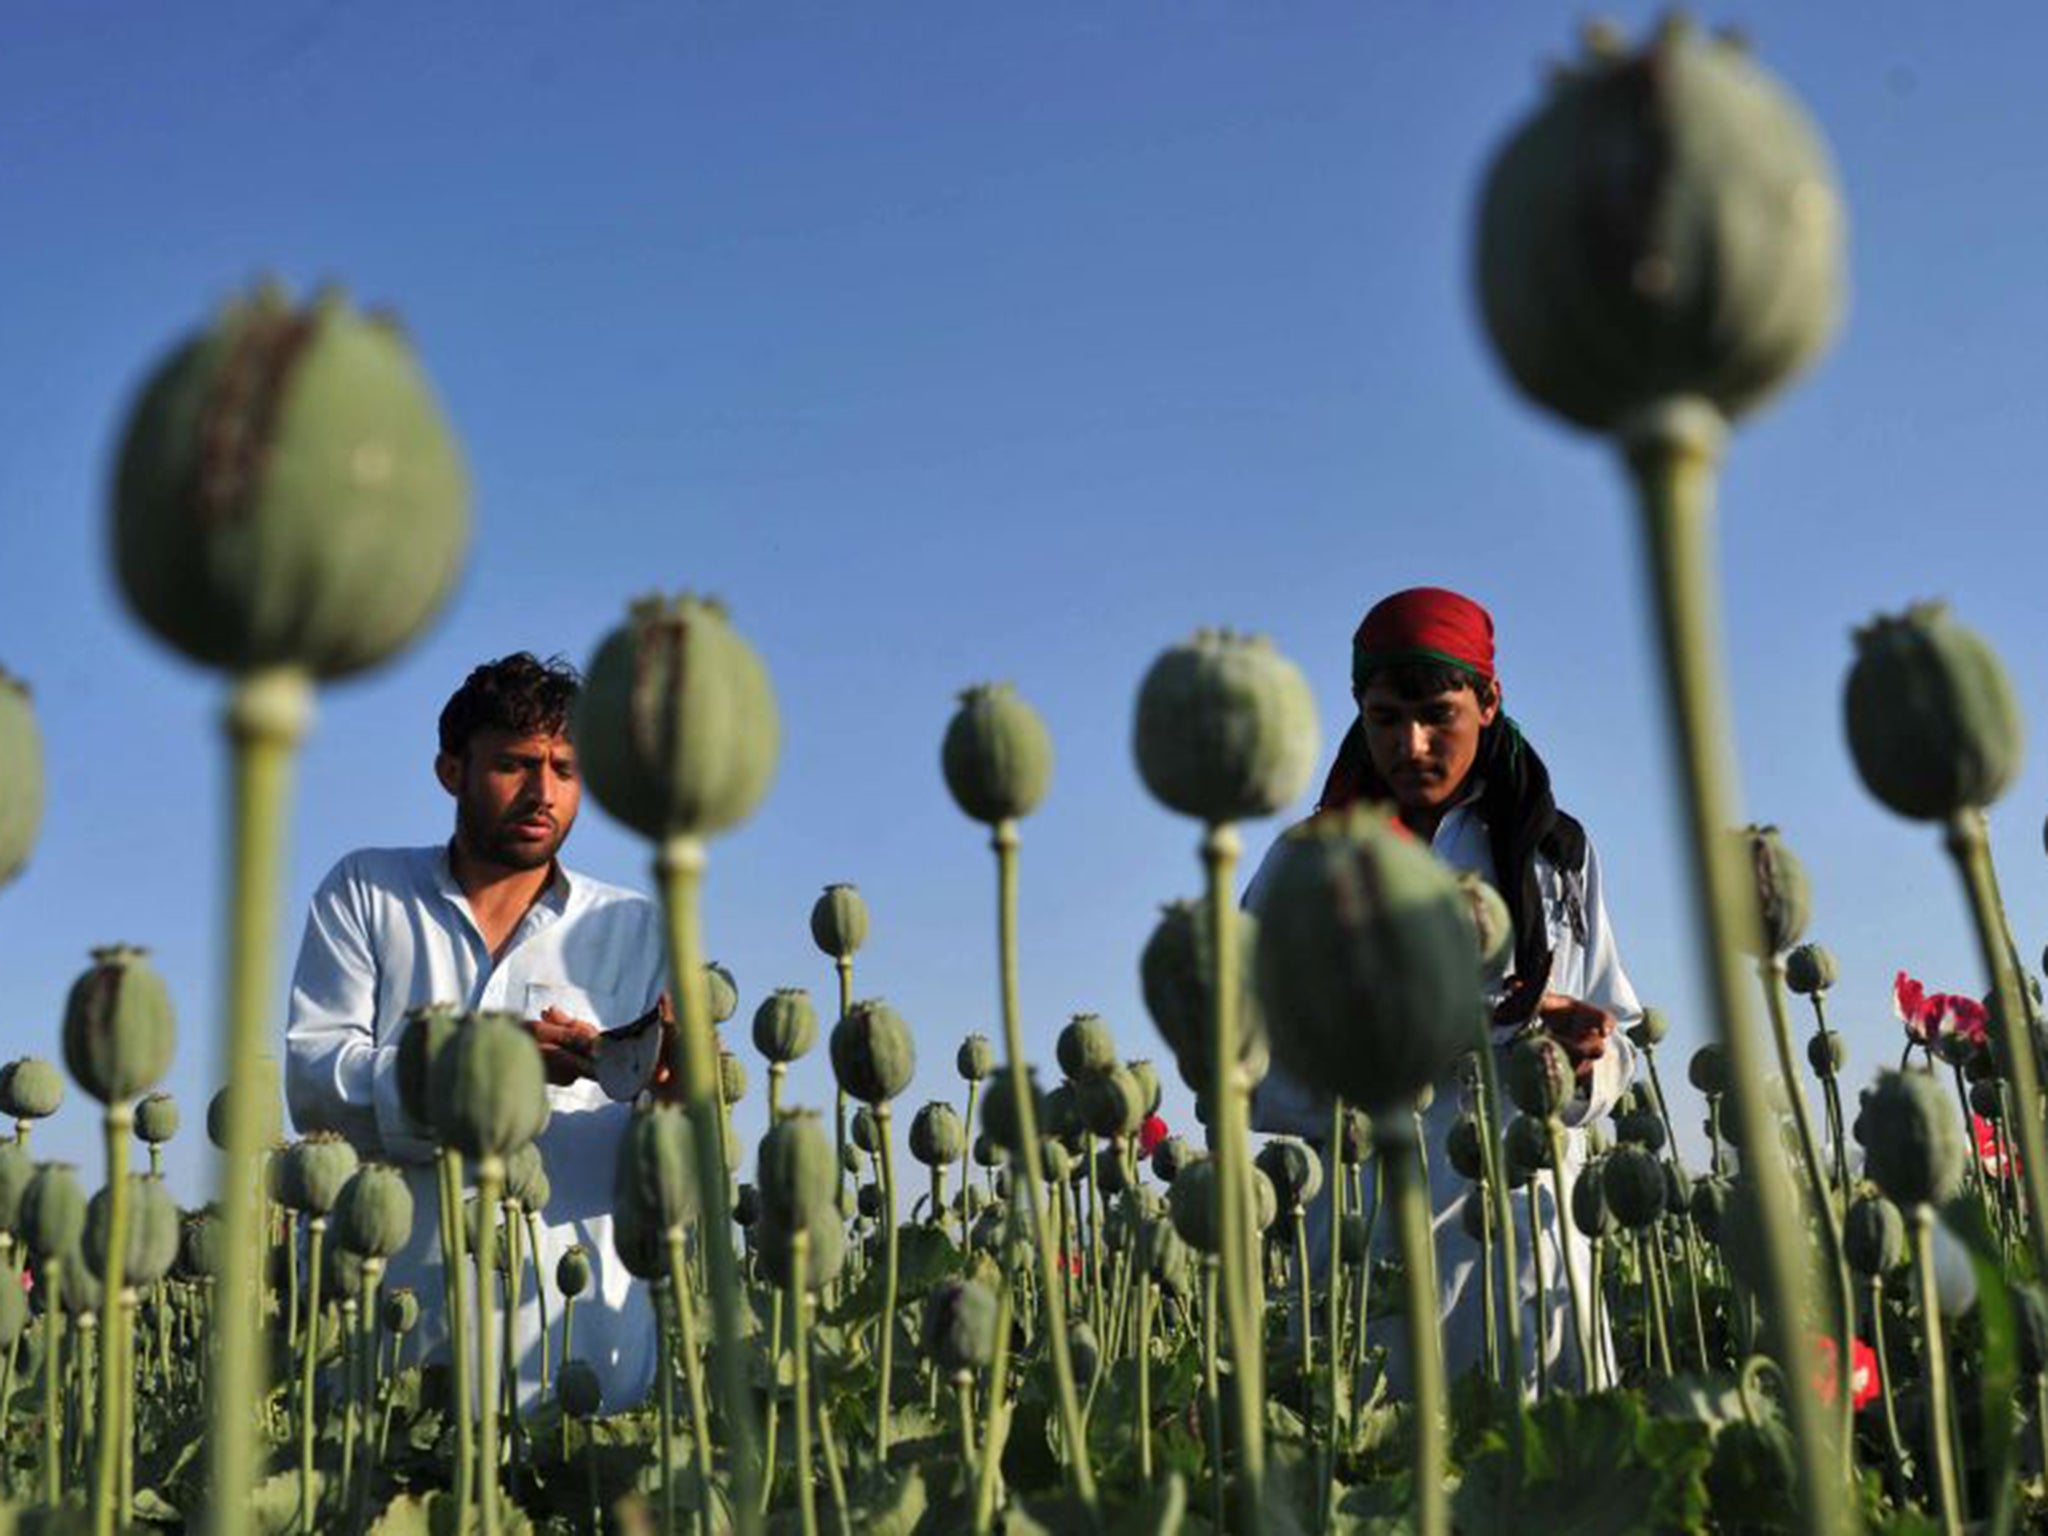 The area under cultivation for poppies is rising as Afghan farmers can get up to 12 times more for the crop than they can for growing cereals or vegetables